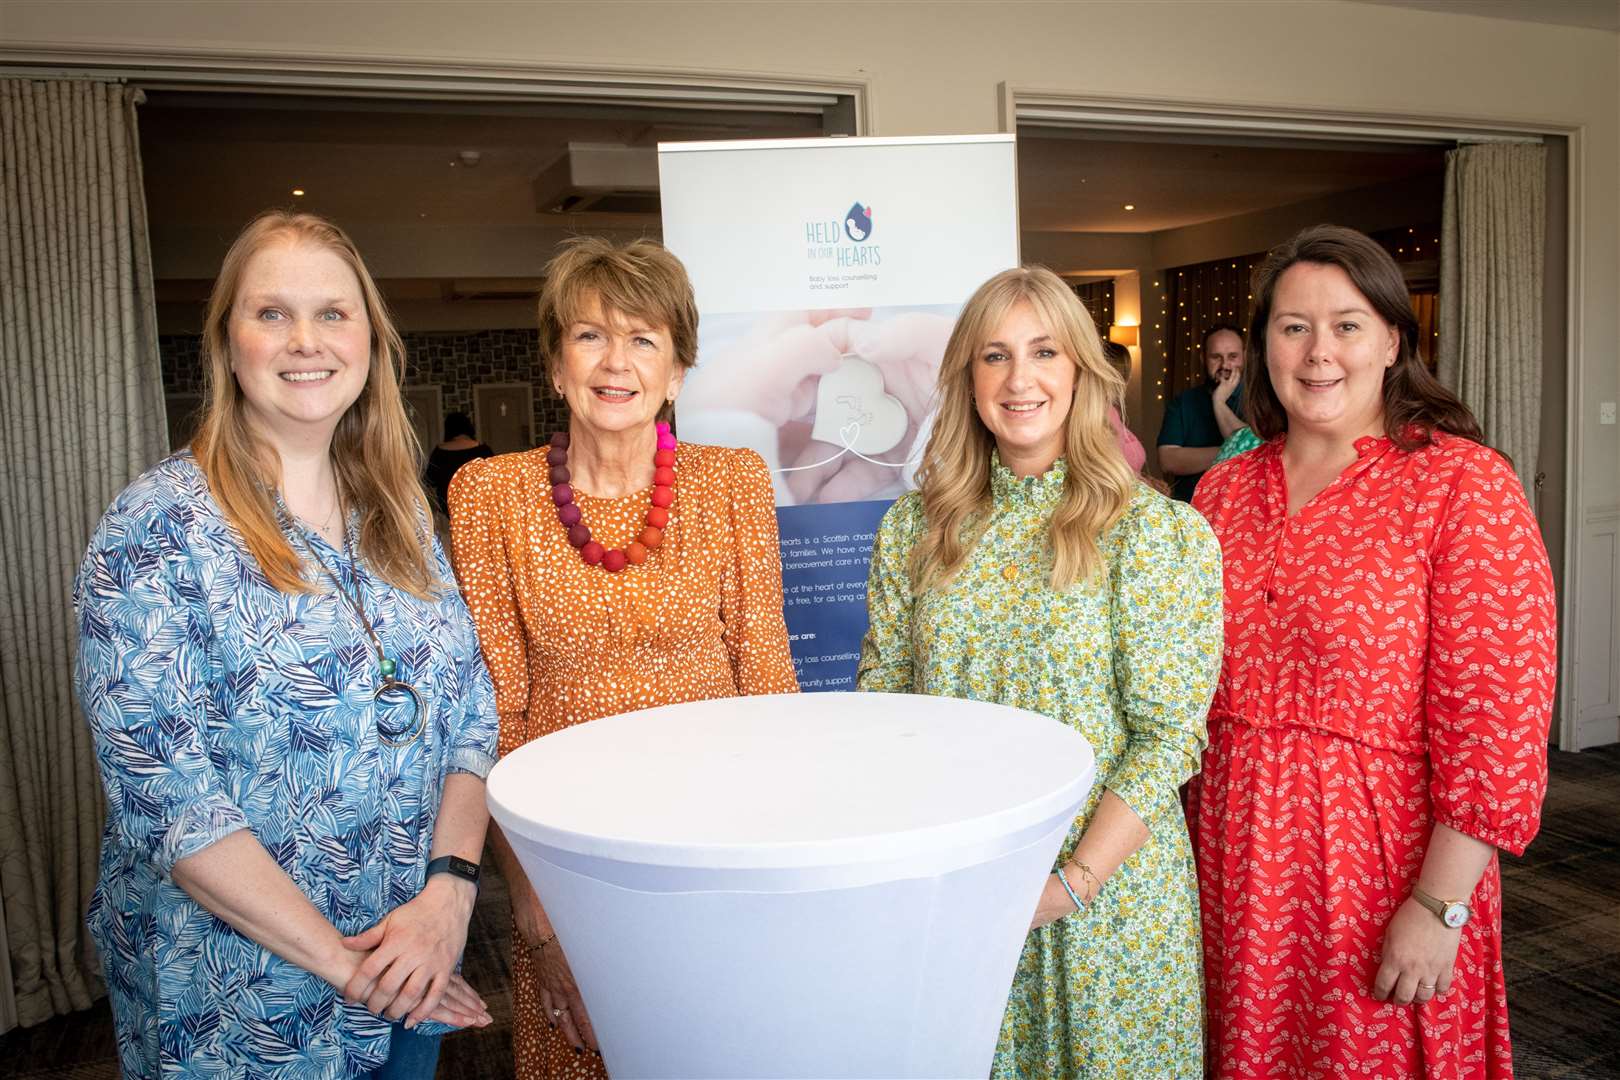 Victoria Erasmus, co-owner of the Glen Mhor Hotel; the charity's Marina Huggett; Nicola Welsh, CEO; and care supporter Lindsay Donaldson. Picture: Callum Mackay